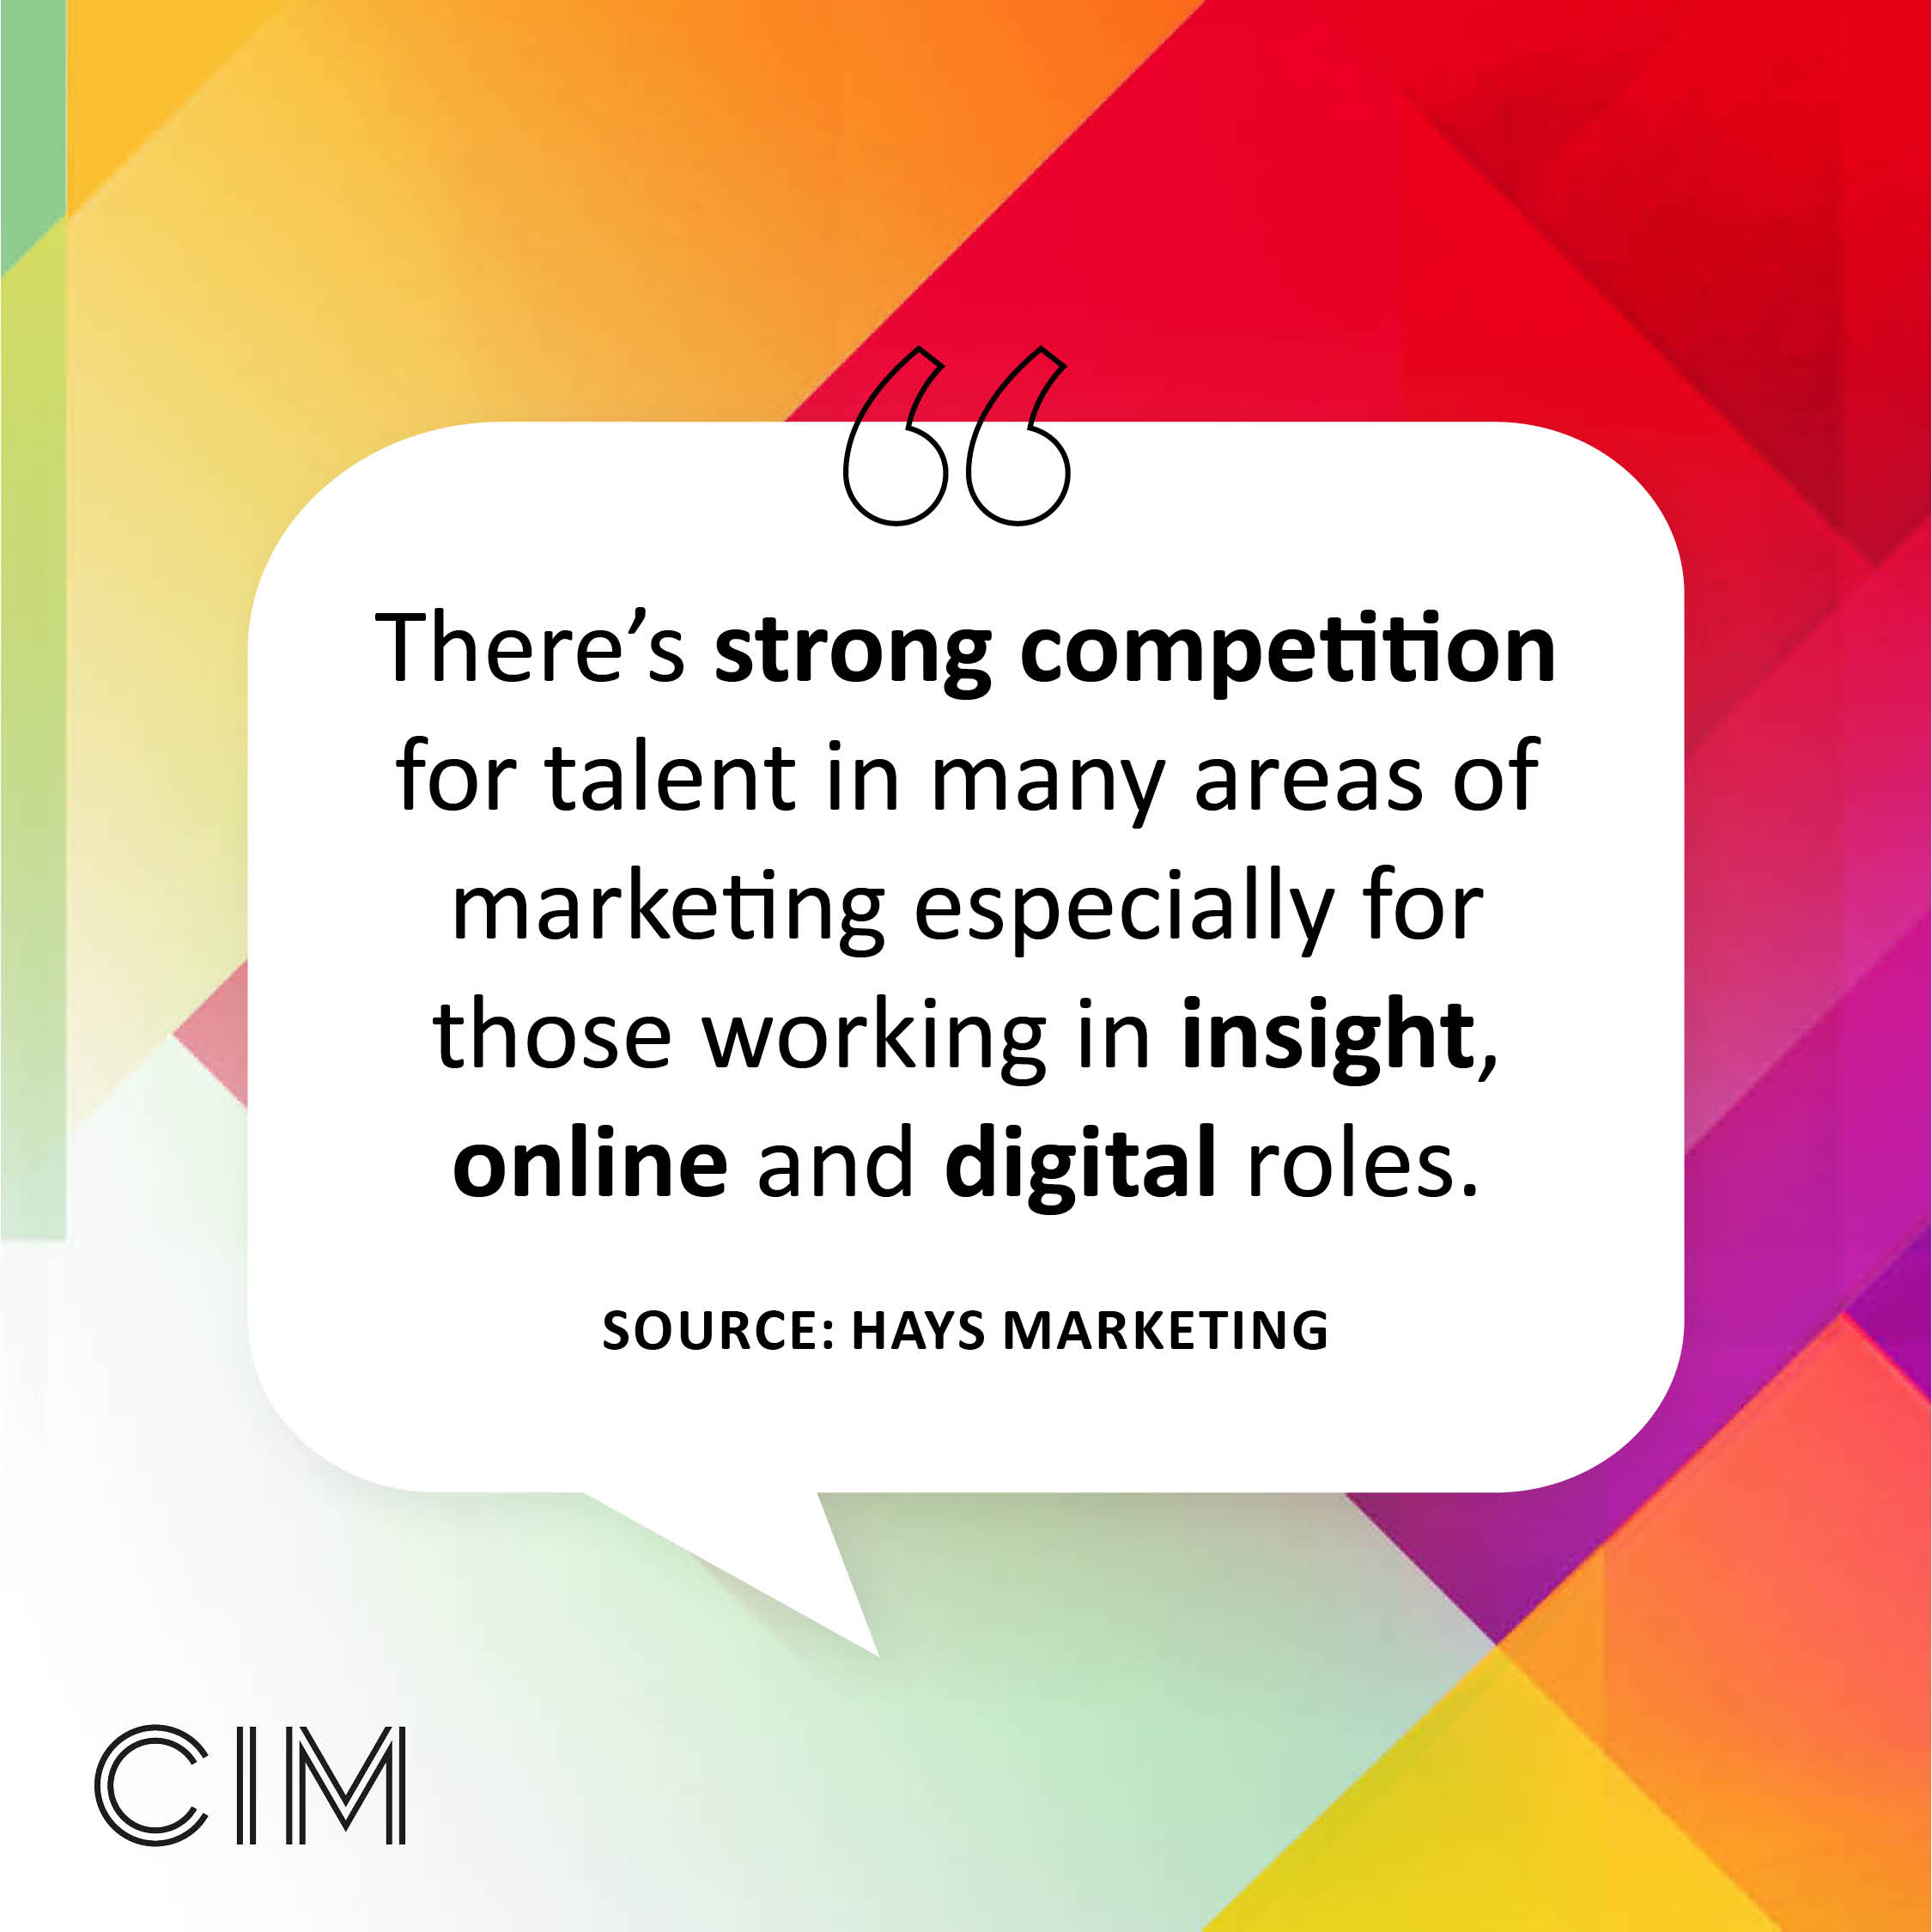 There's strong competition for talent in many areas of marketing, especially for those working in insight, online and digital roles